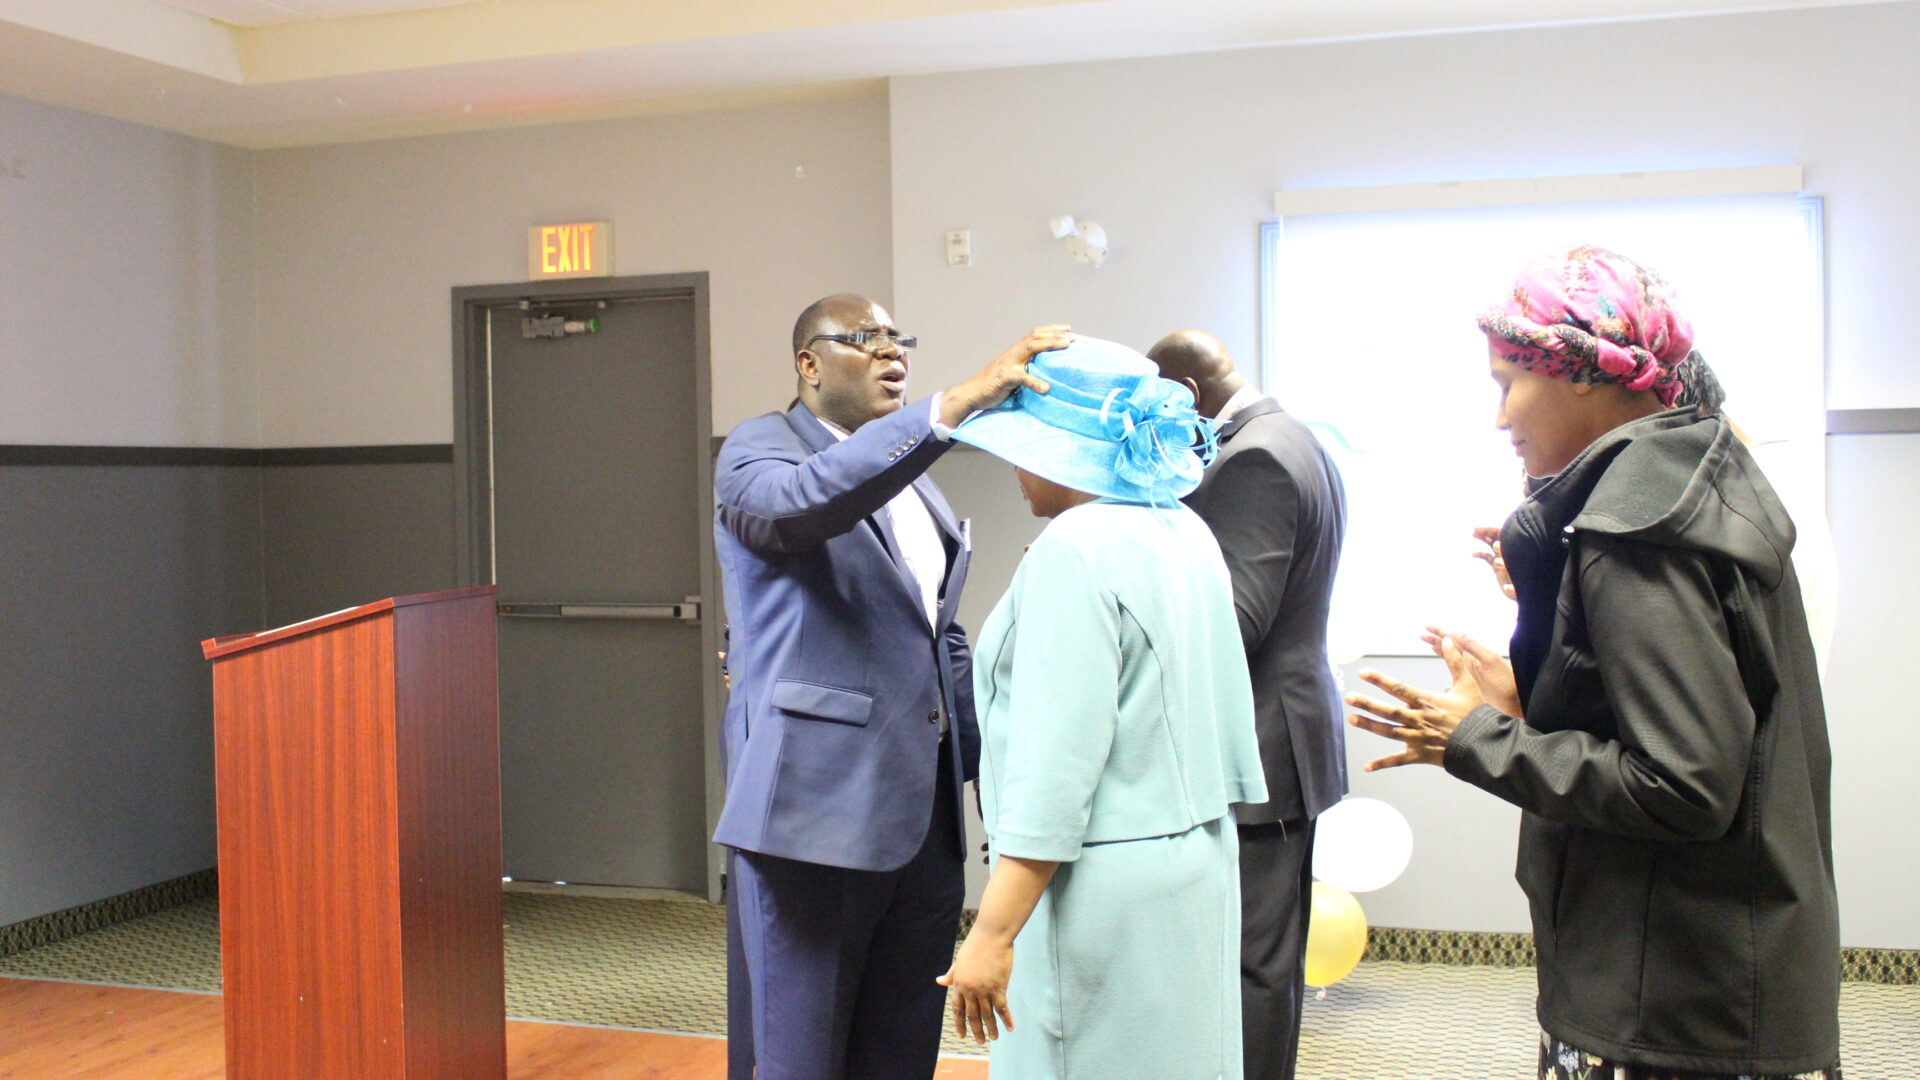 A pastor placing his hand on a person’s hat while praying